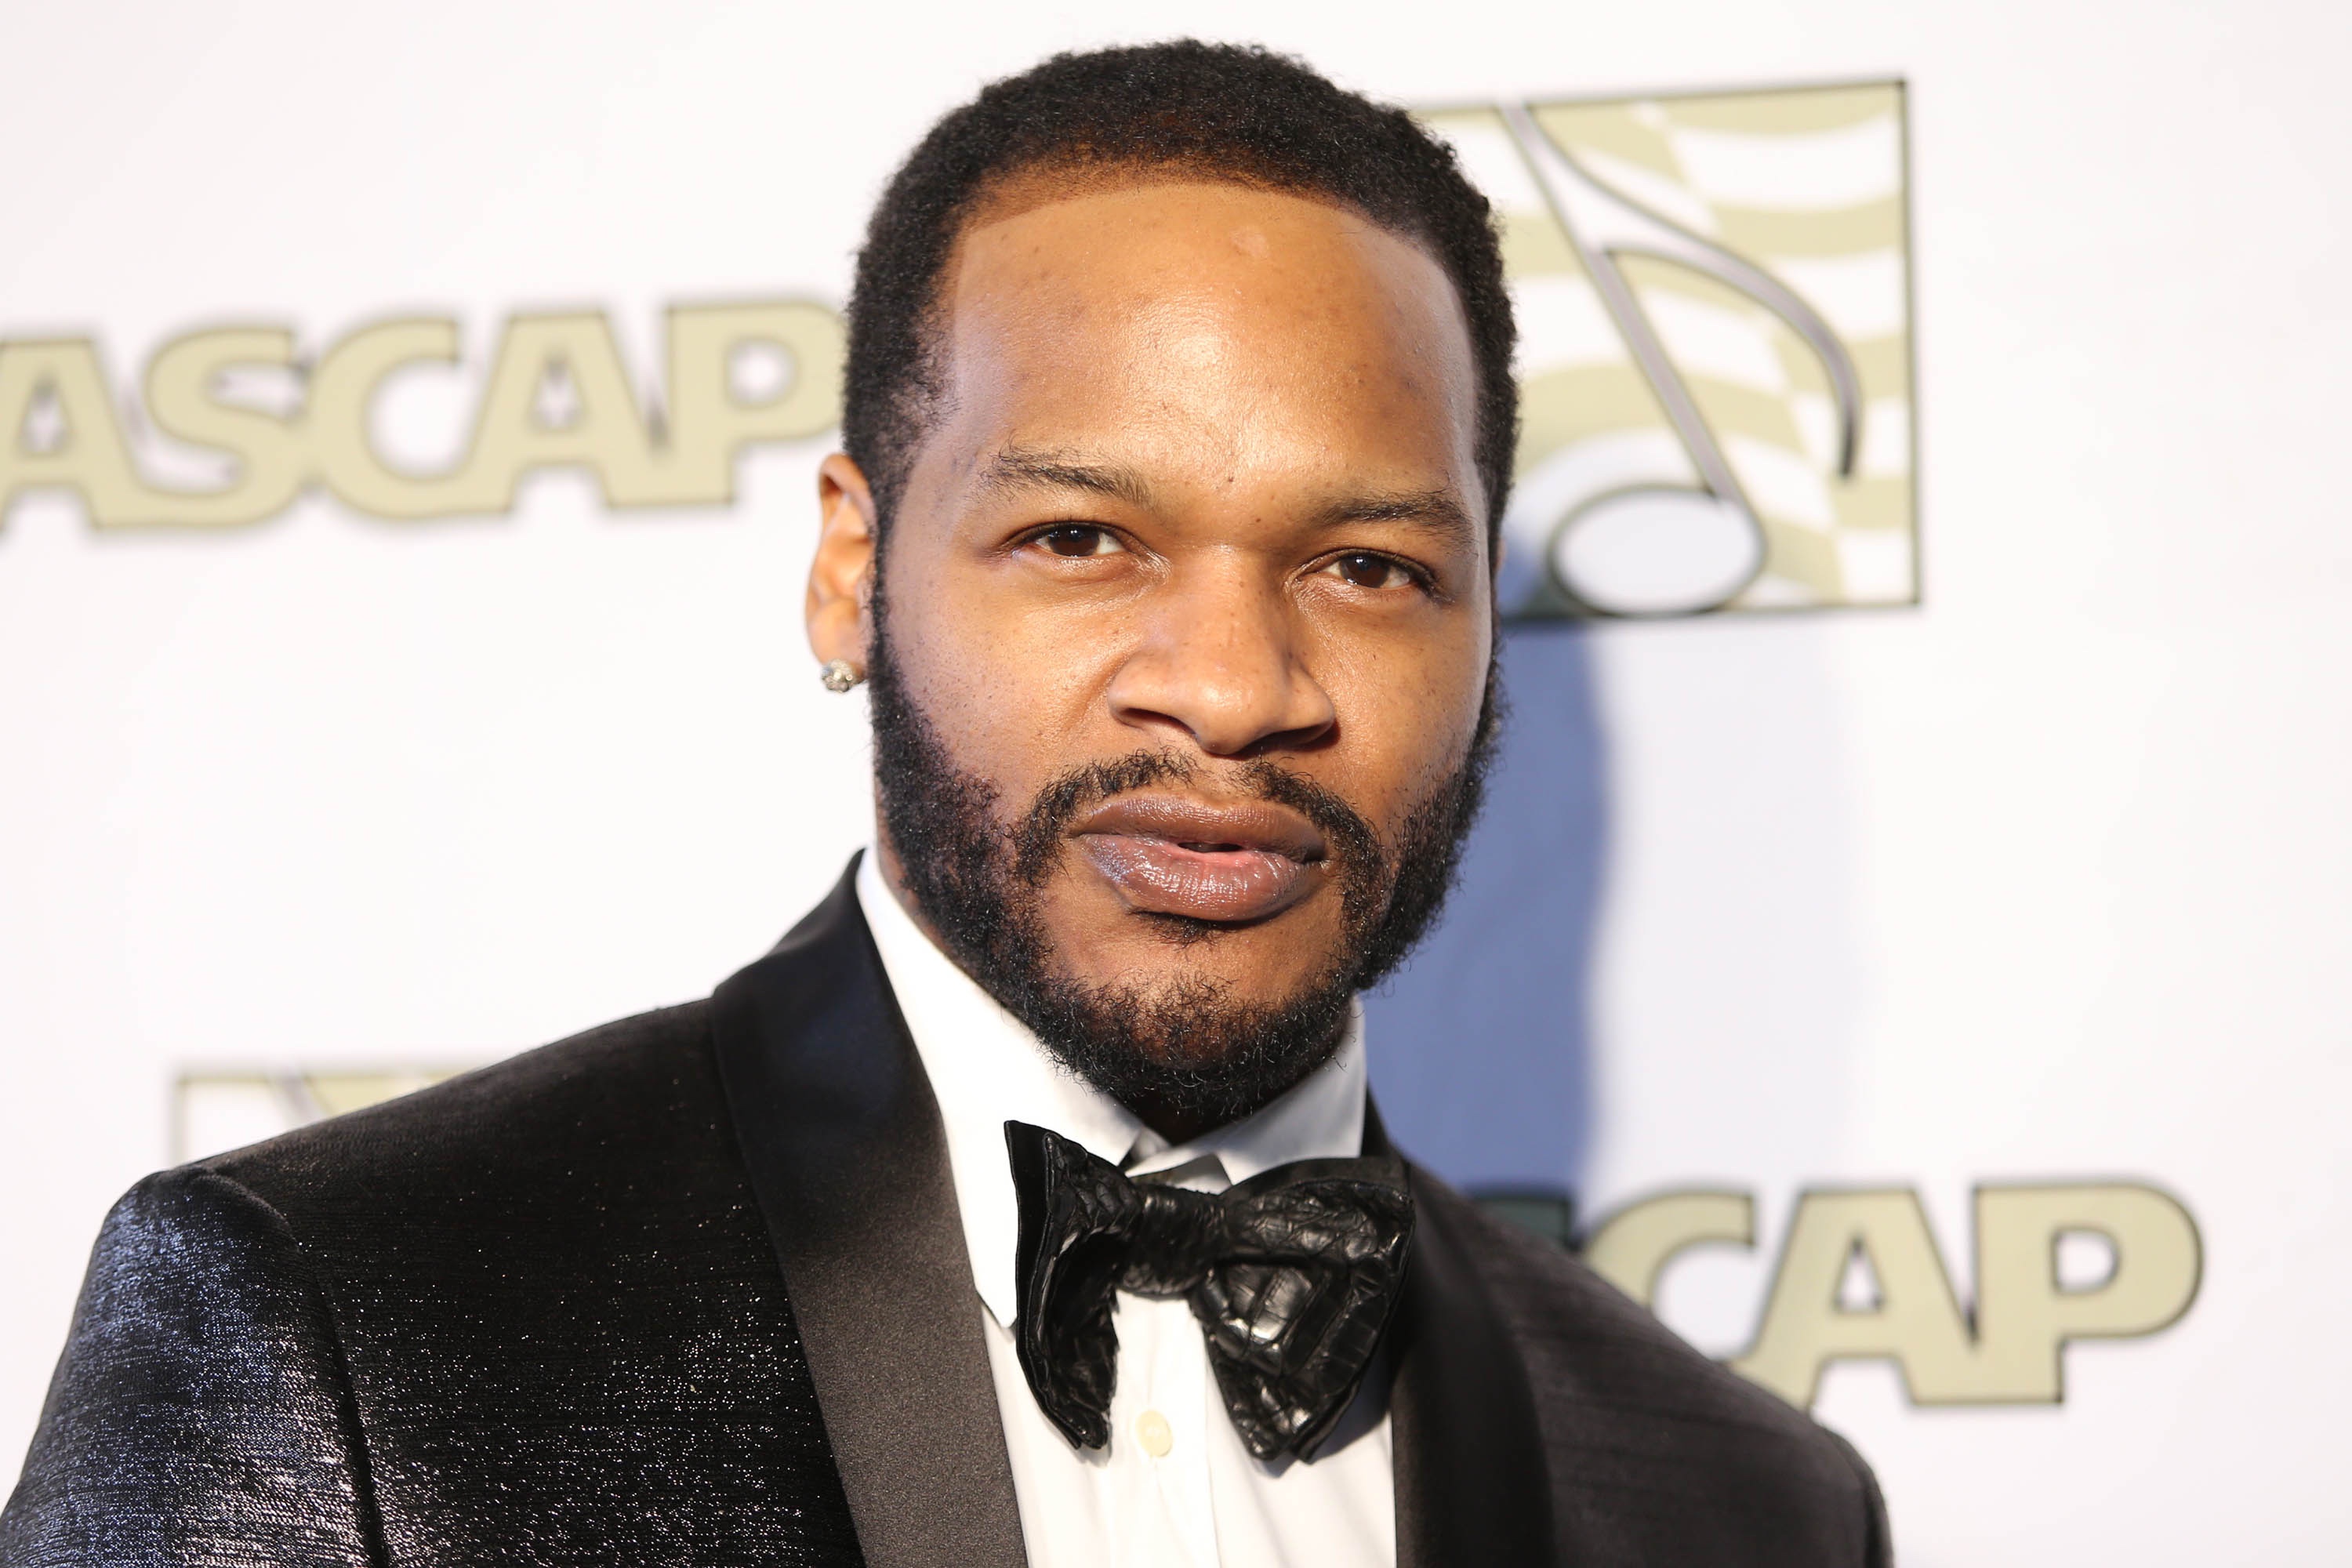 #jaheim says trump saved a lot of. #people. watch janet. 